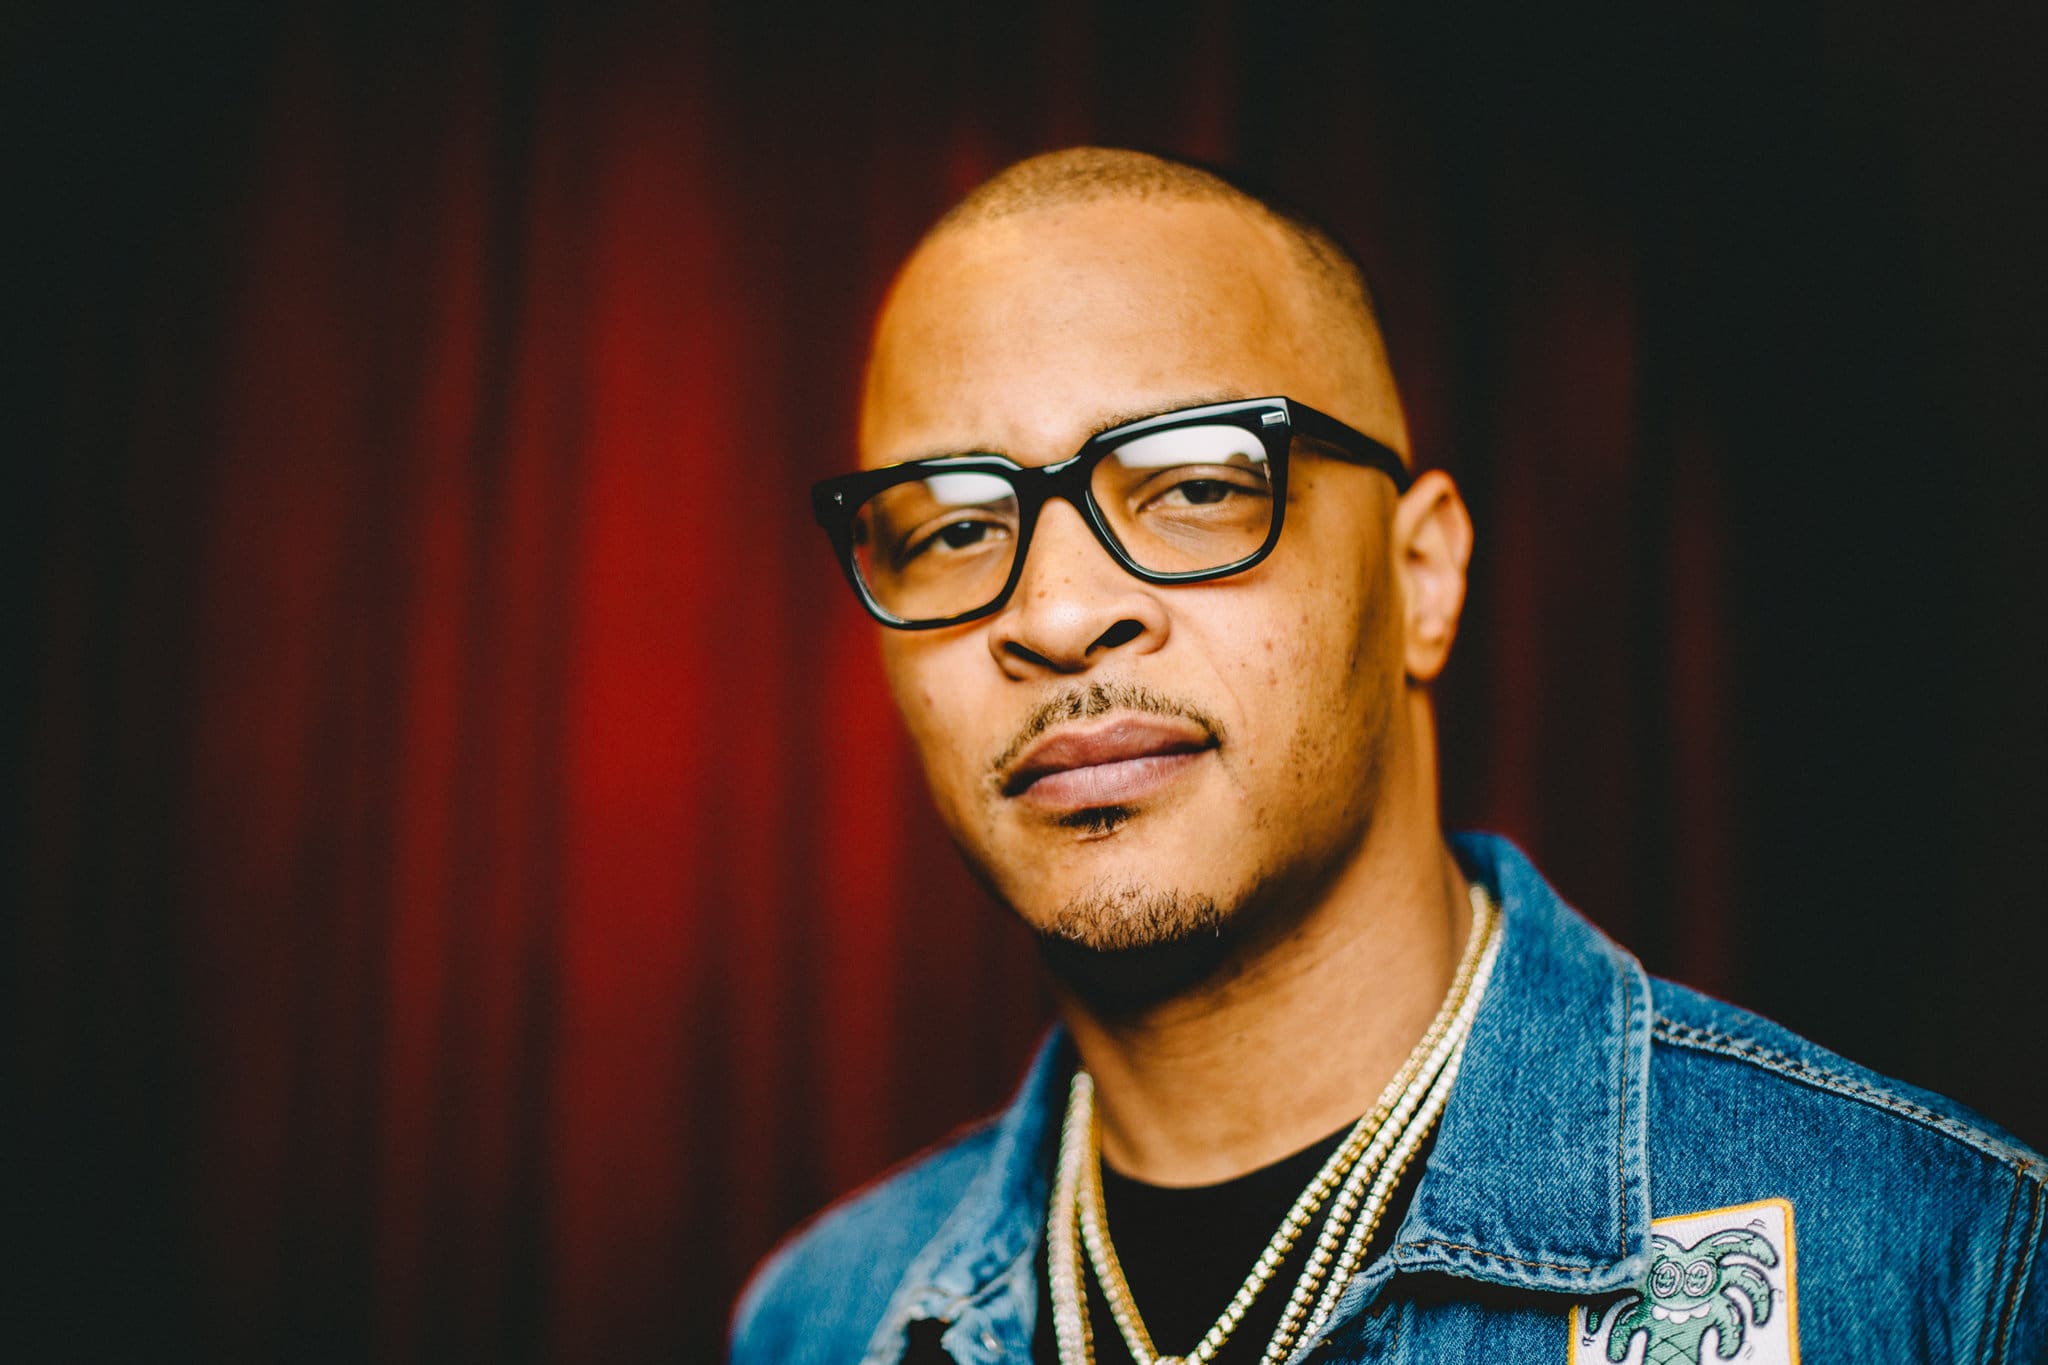 T.I. Tells Fans That The Fight Is Not Over Yet - Check Out His Message